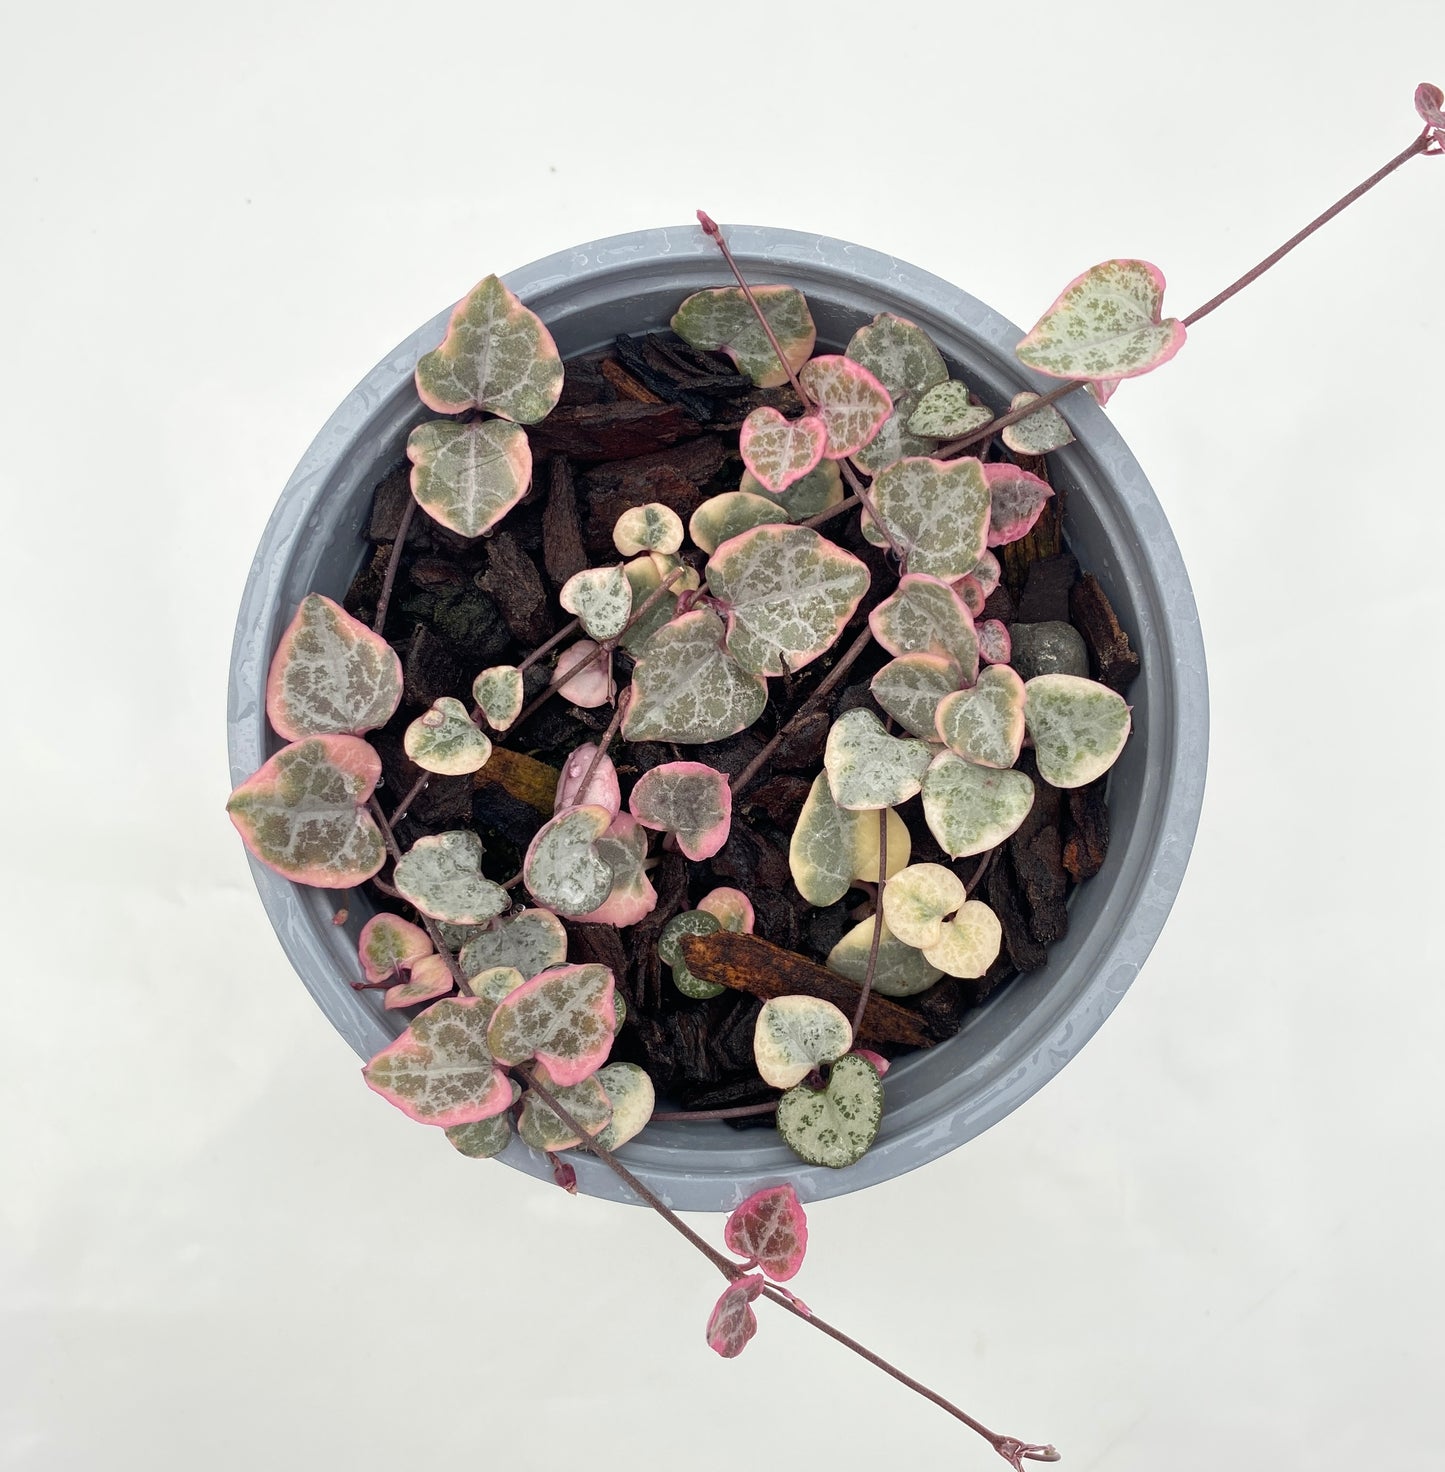 Variegated Chain of Hearts - Ceropegia woodii variegated 12cm pot